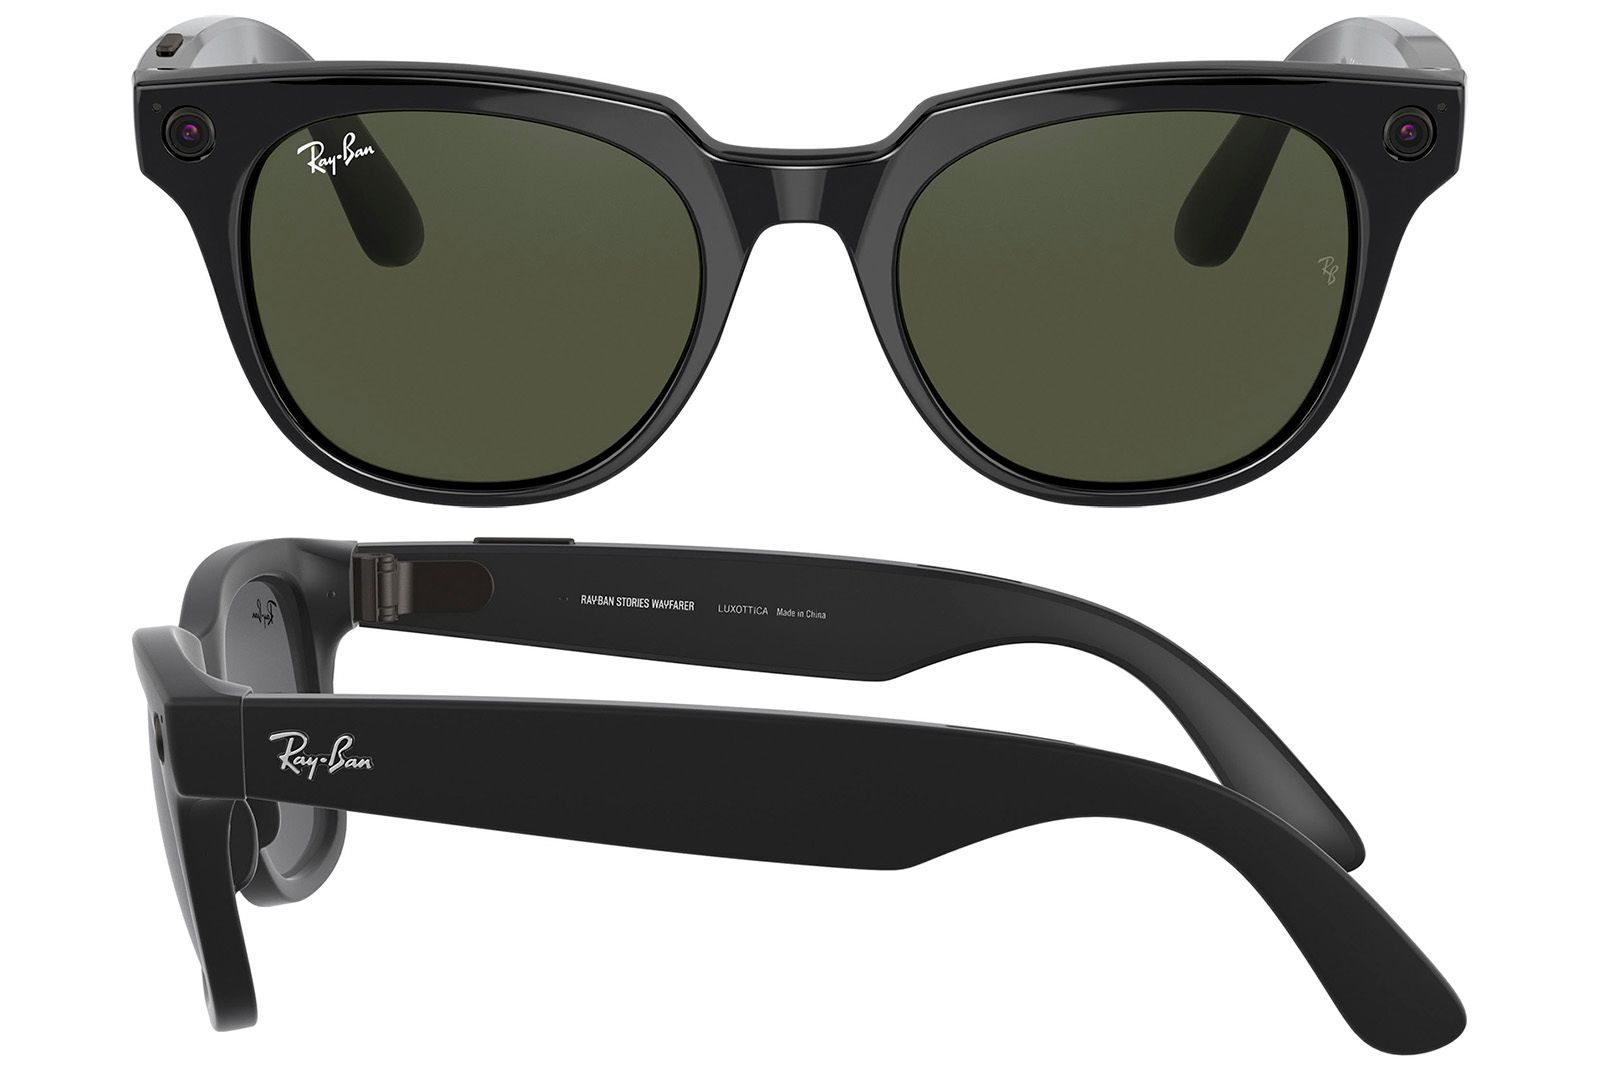 Facebook x Ray-Ban AR glasses leak - pictures galore photo 1